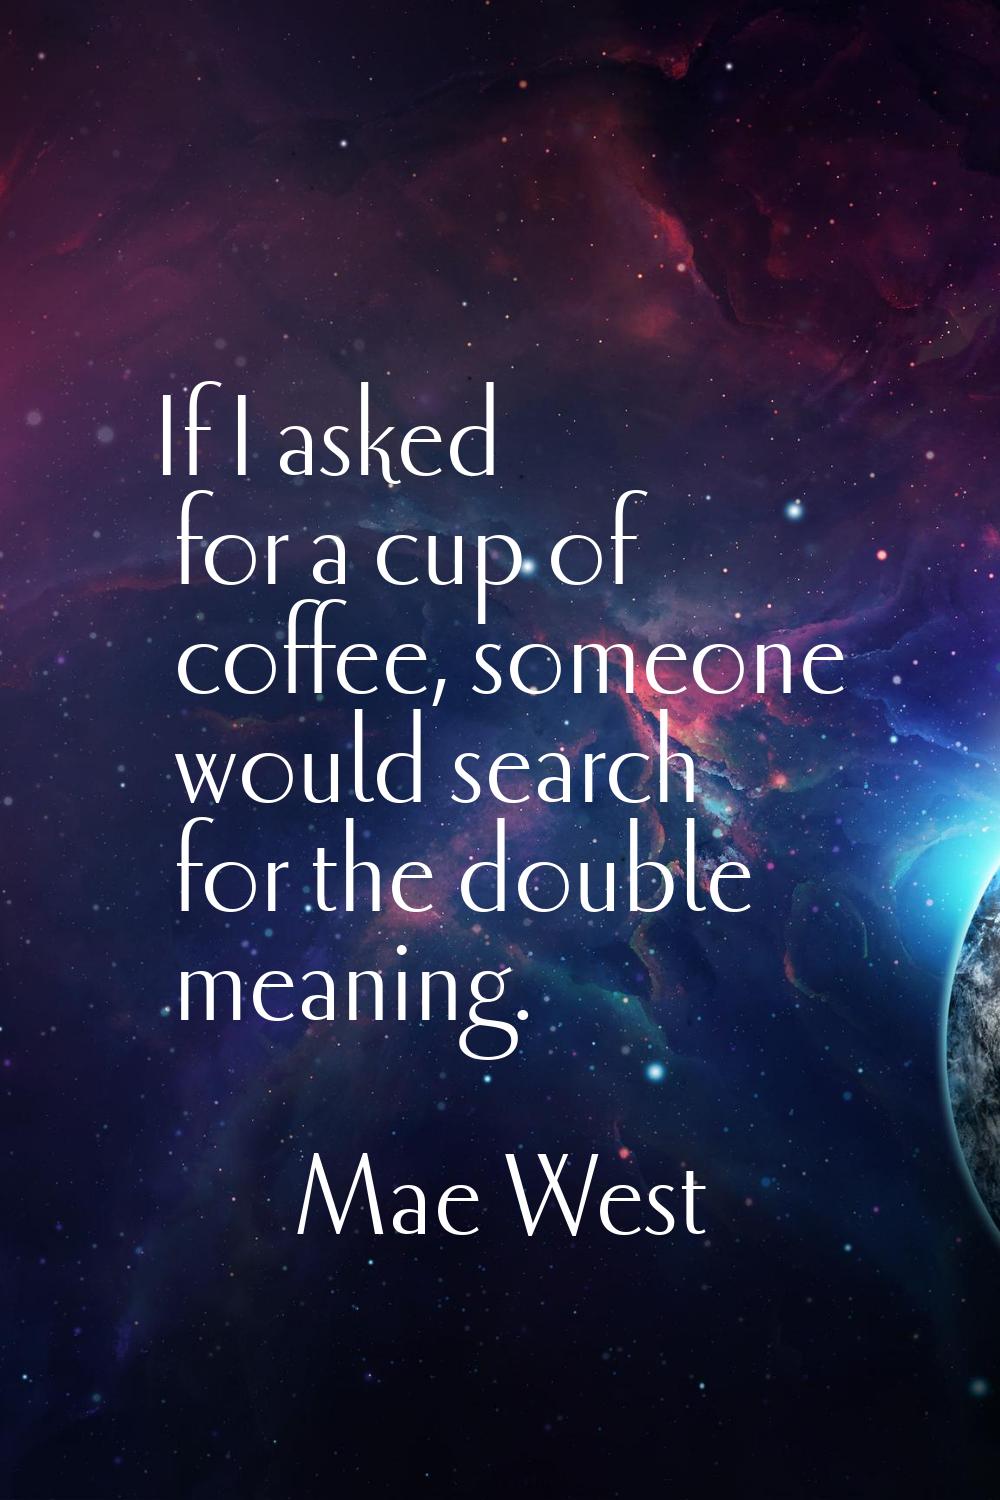 If I asked for a cup of coffee, someone would search for the double meaning.